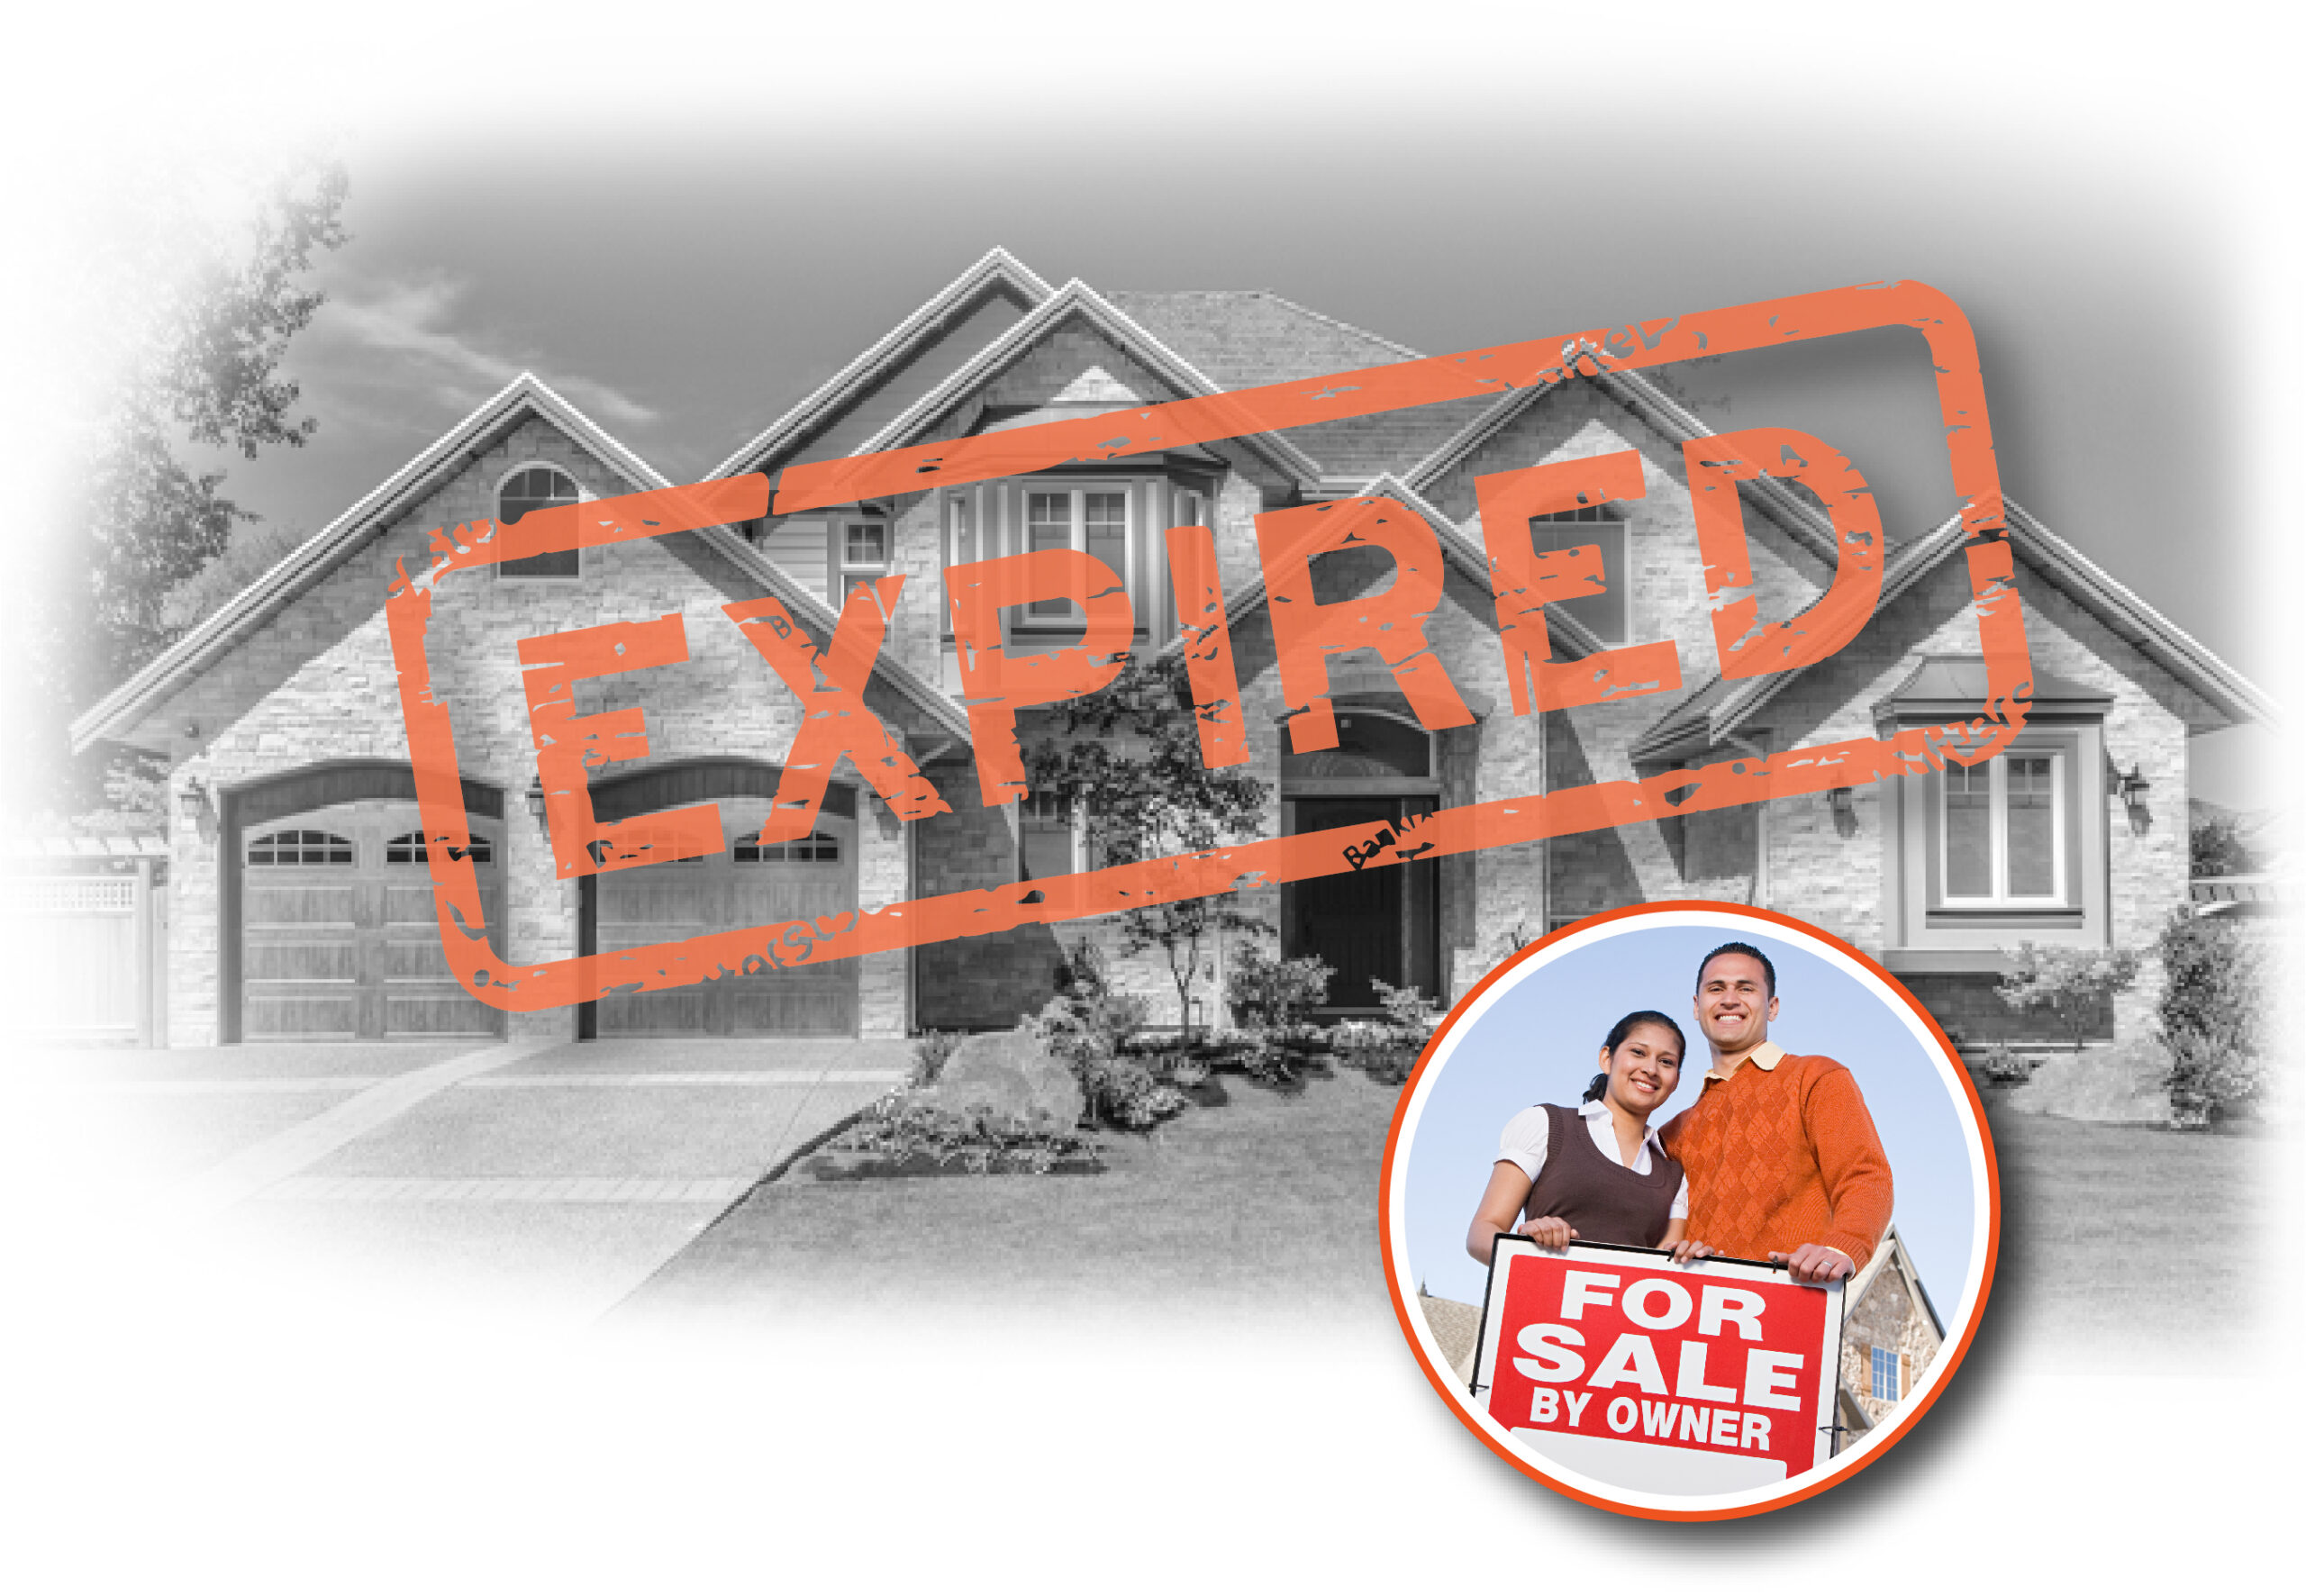 Expired home listing